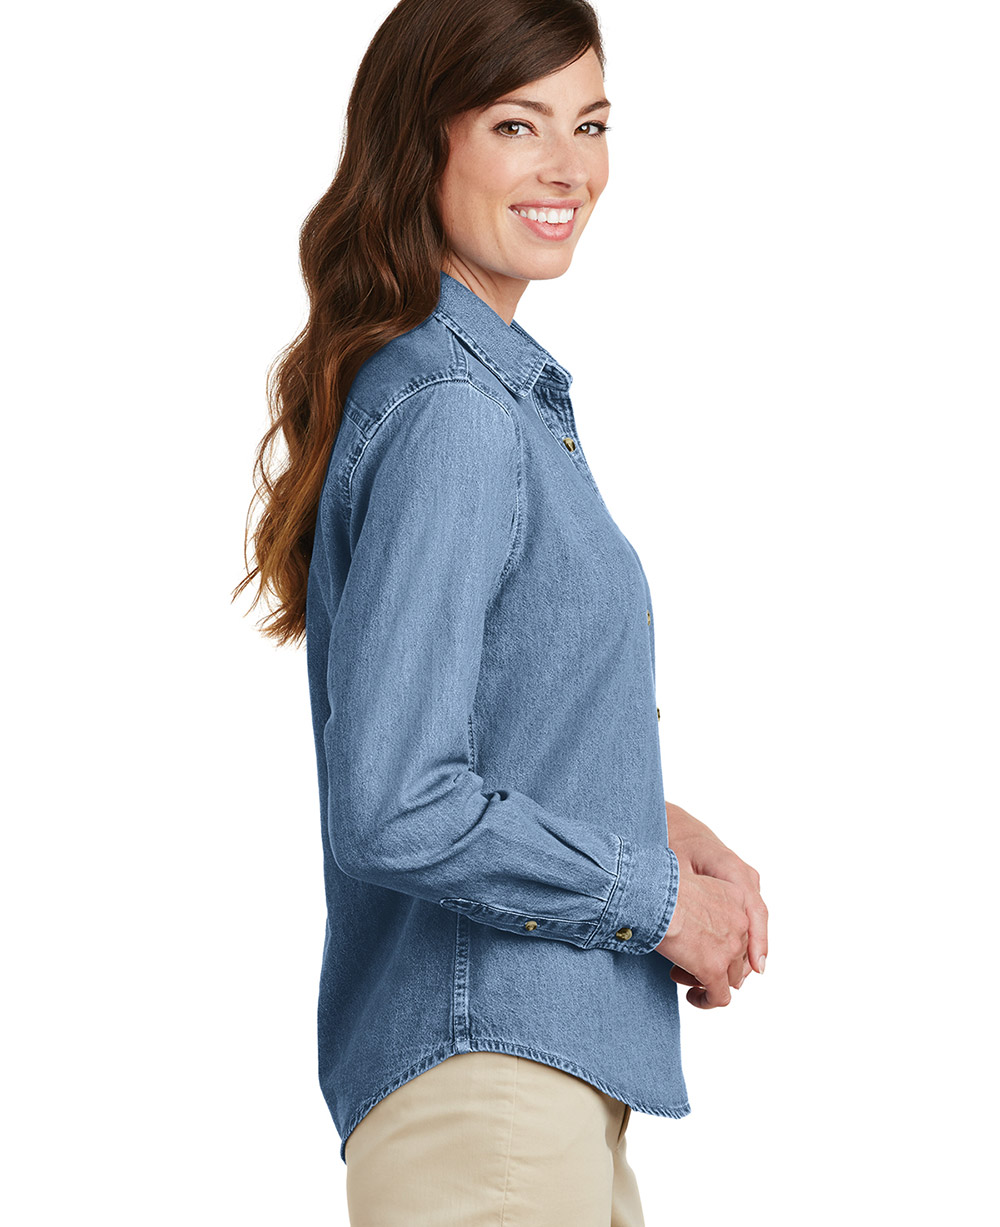 YourBreed Clothing Company Collie Embroidered Ladies 100% Cotton Denim Shirt